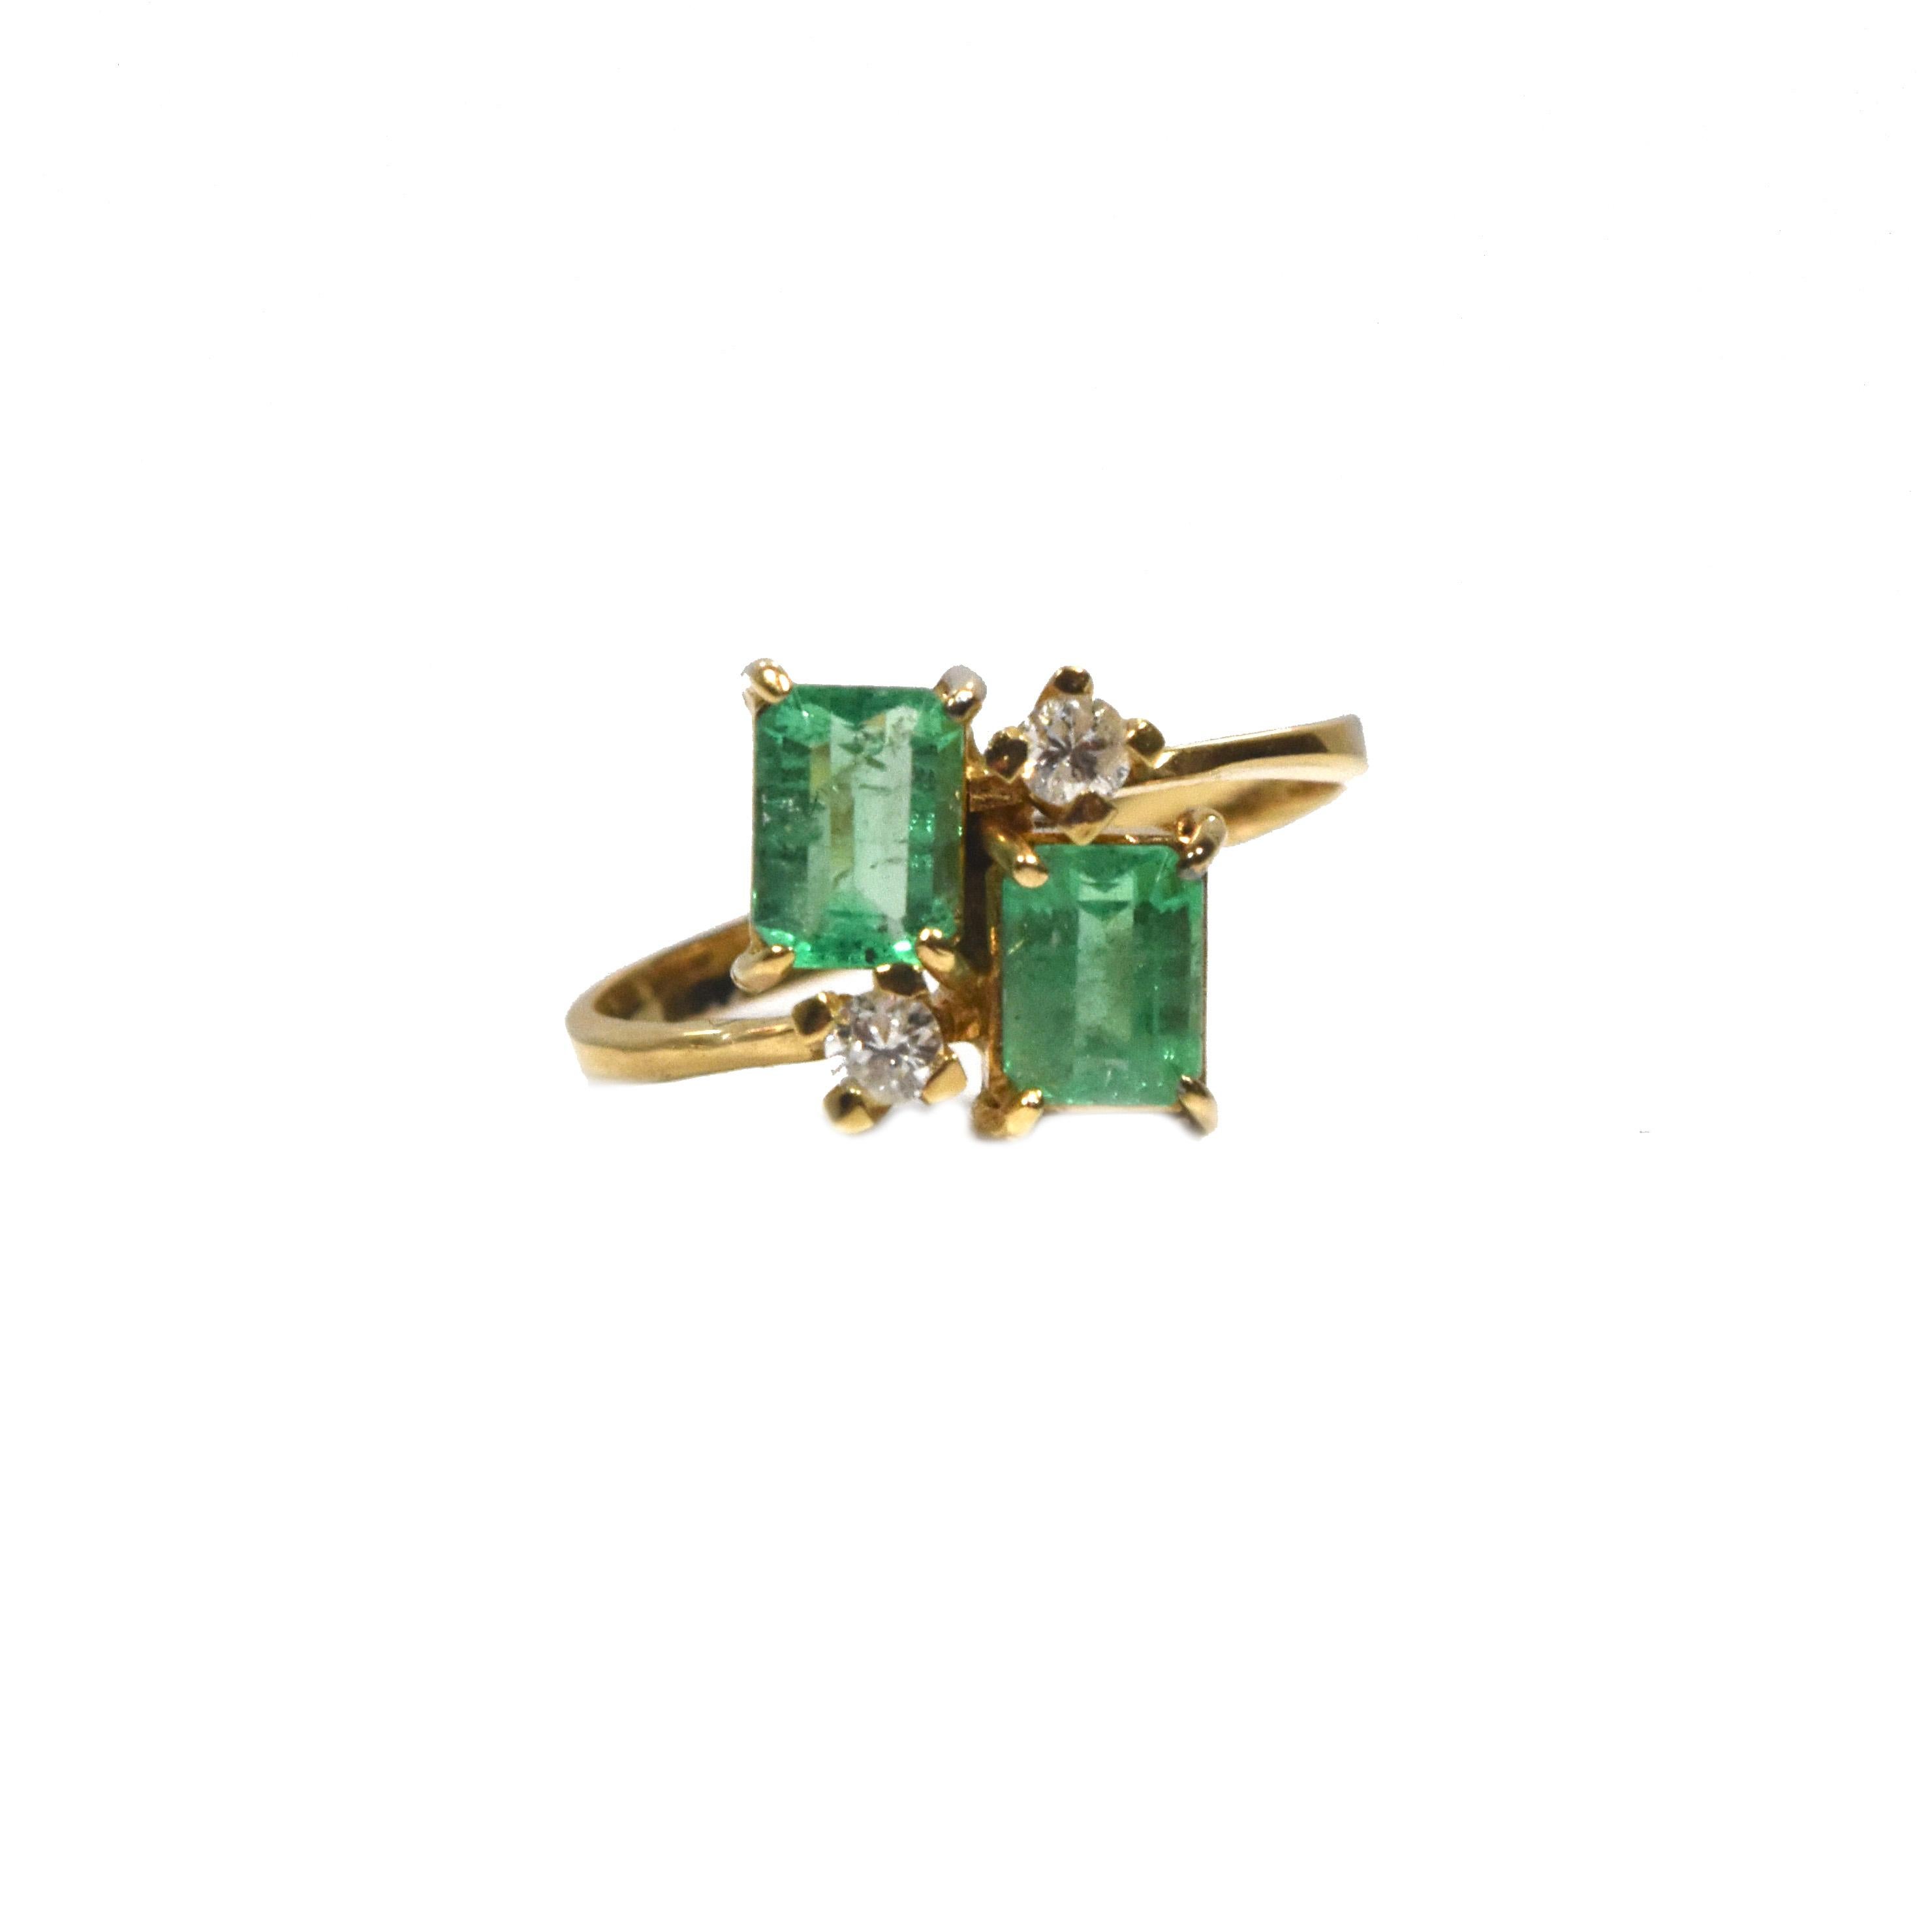 Beautiful vintage emerald ring. The emerald is known for being one of the first stone mined from the earth back in Ancient Egypt some 5000 years ago and was used in Royal adornments. Feel like a modern Cleopatra while wearing this stunning ring made